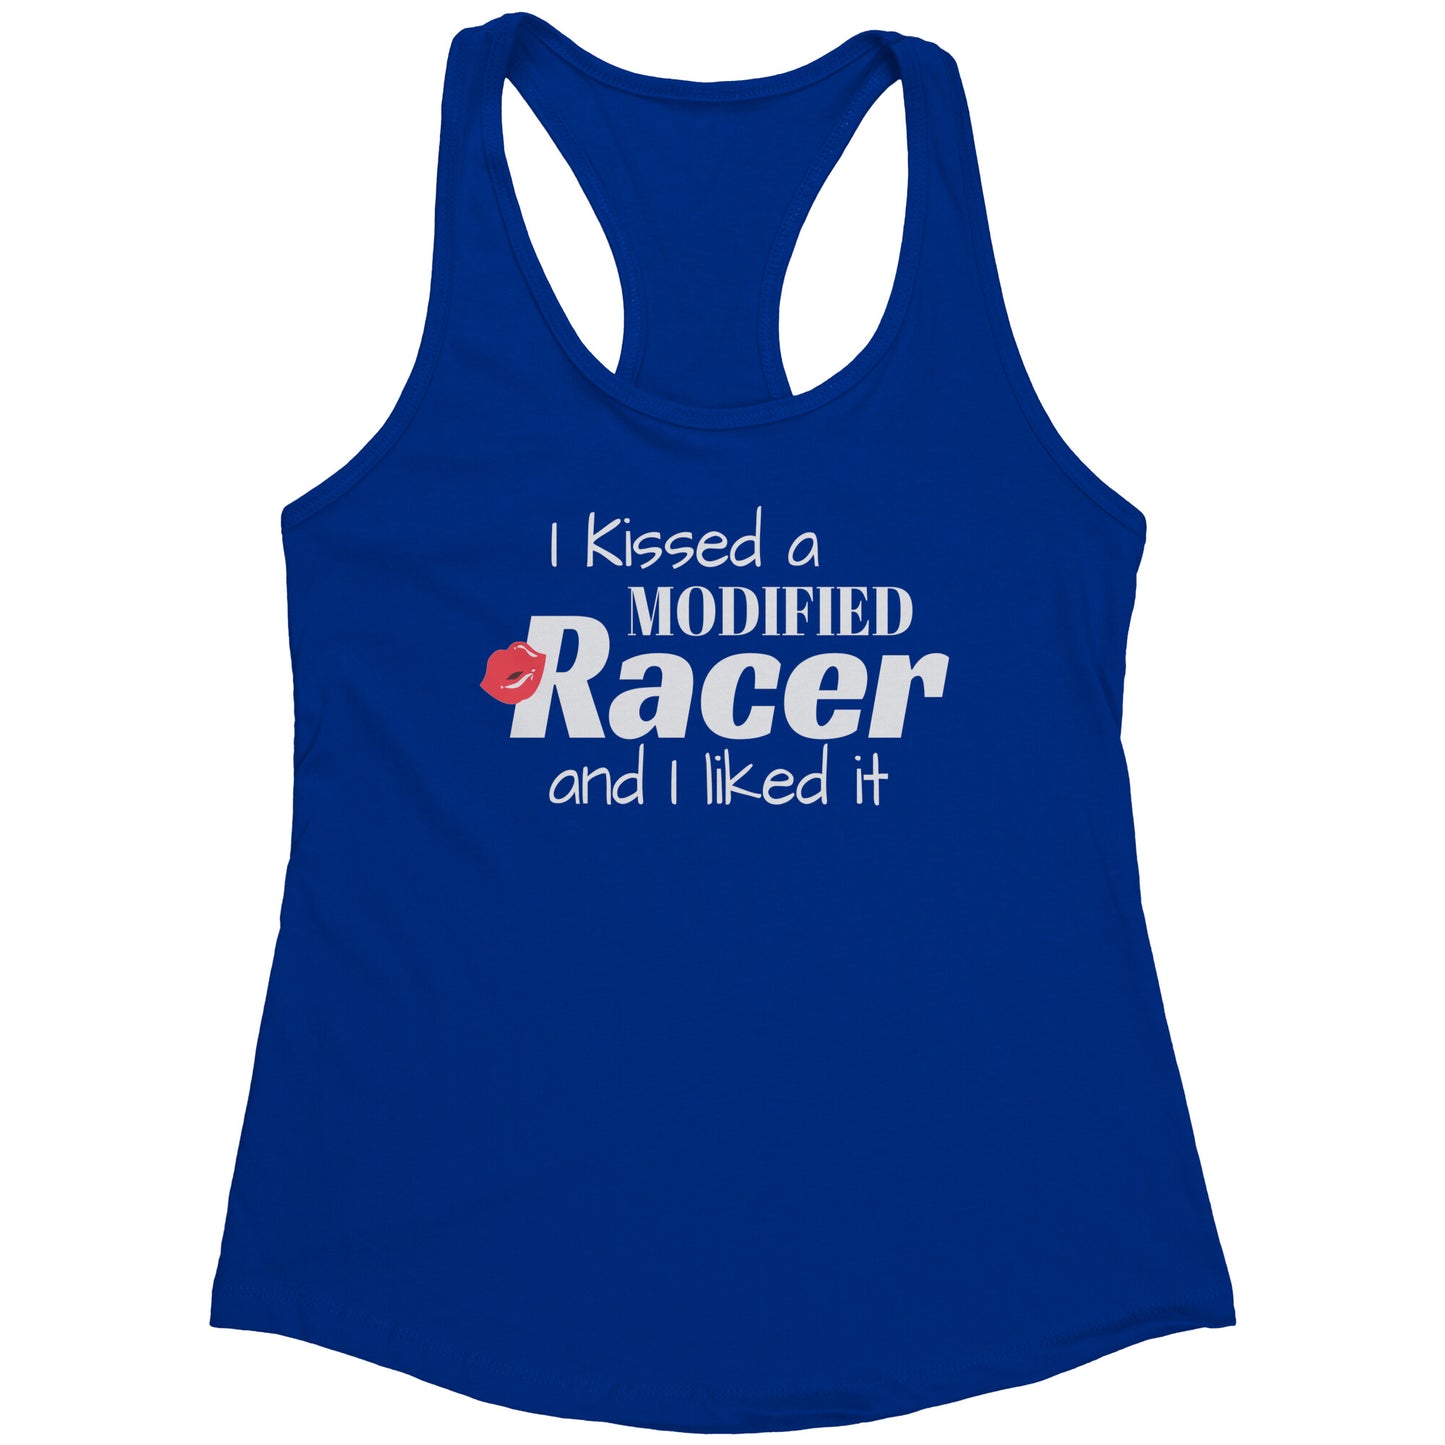 I KISSED A MODIFIED RACER AND I LIKED IT WOMEN TANK TOP